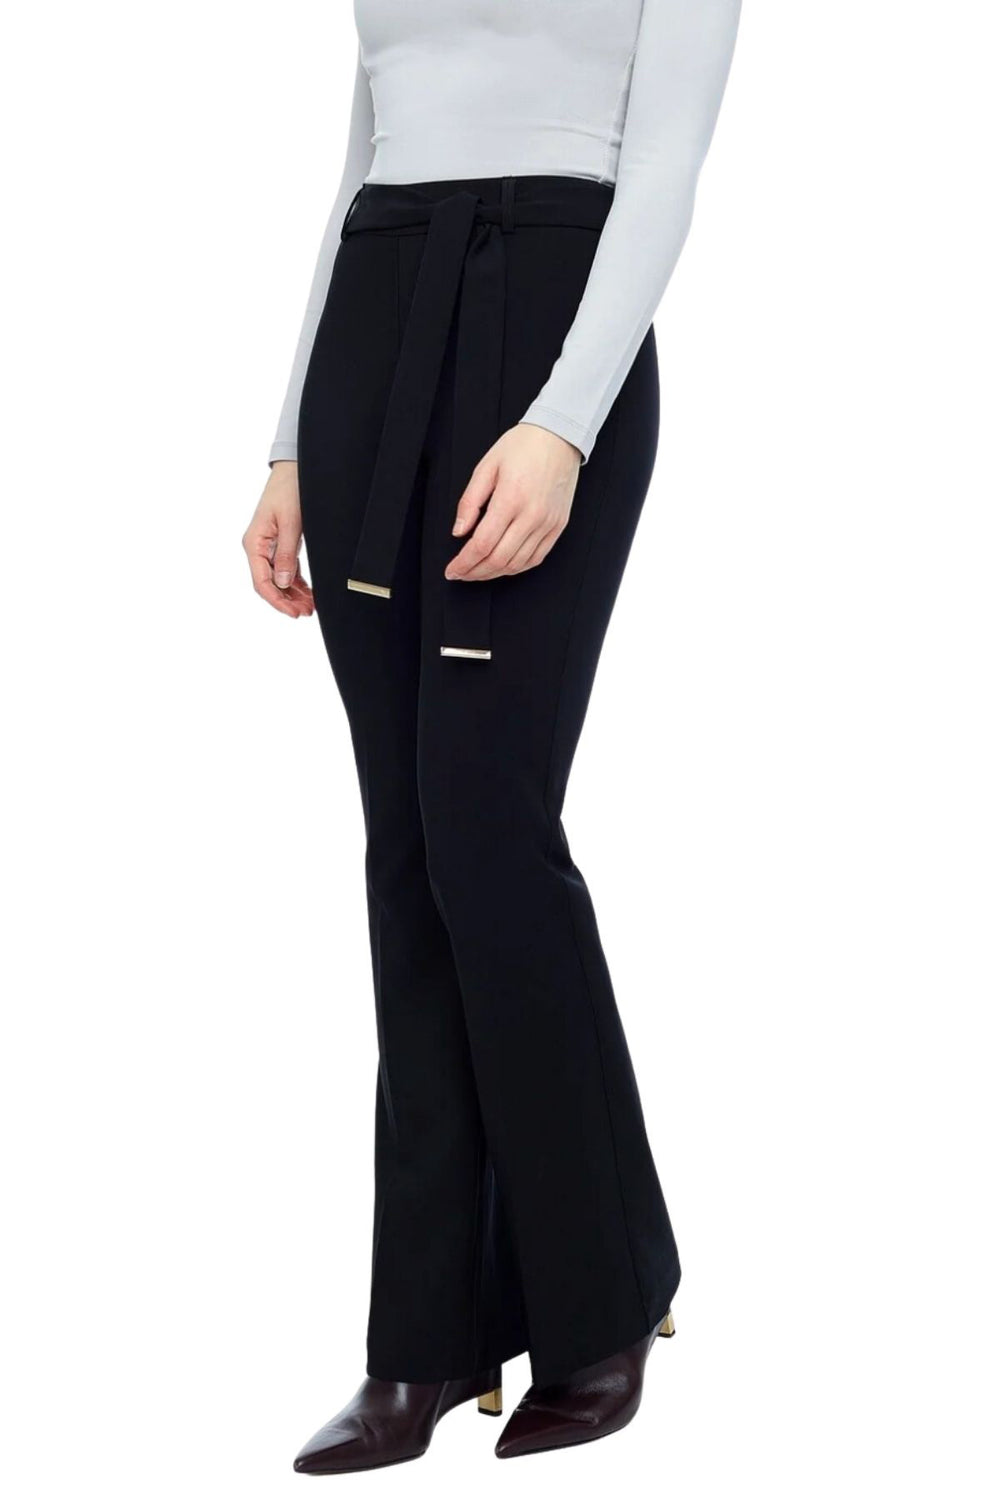 Perfectly tailored the Palermo Bootcut Pant by Up! is all about sophistication and elegance. With its tailored aesthetic and featuring a slip on tummy control waistband these pants are flattering and comfortable. Featuring a removable belt sash, with a classic full length makes these pants timeless and on trend.  Brand : Up! Style Code : 67591 UP Women’s body-shaping bootcut pant Pull-on elastic waistband Built-in tummy control Slim bootcut fit Full length Tailored leg pleats Removable belt sash